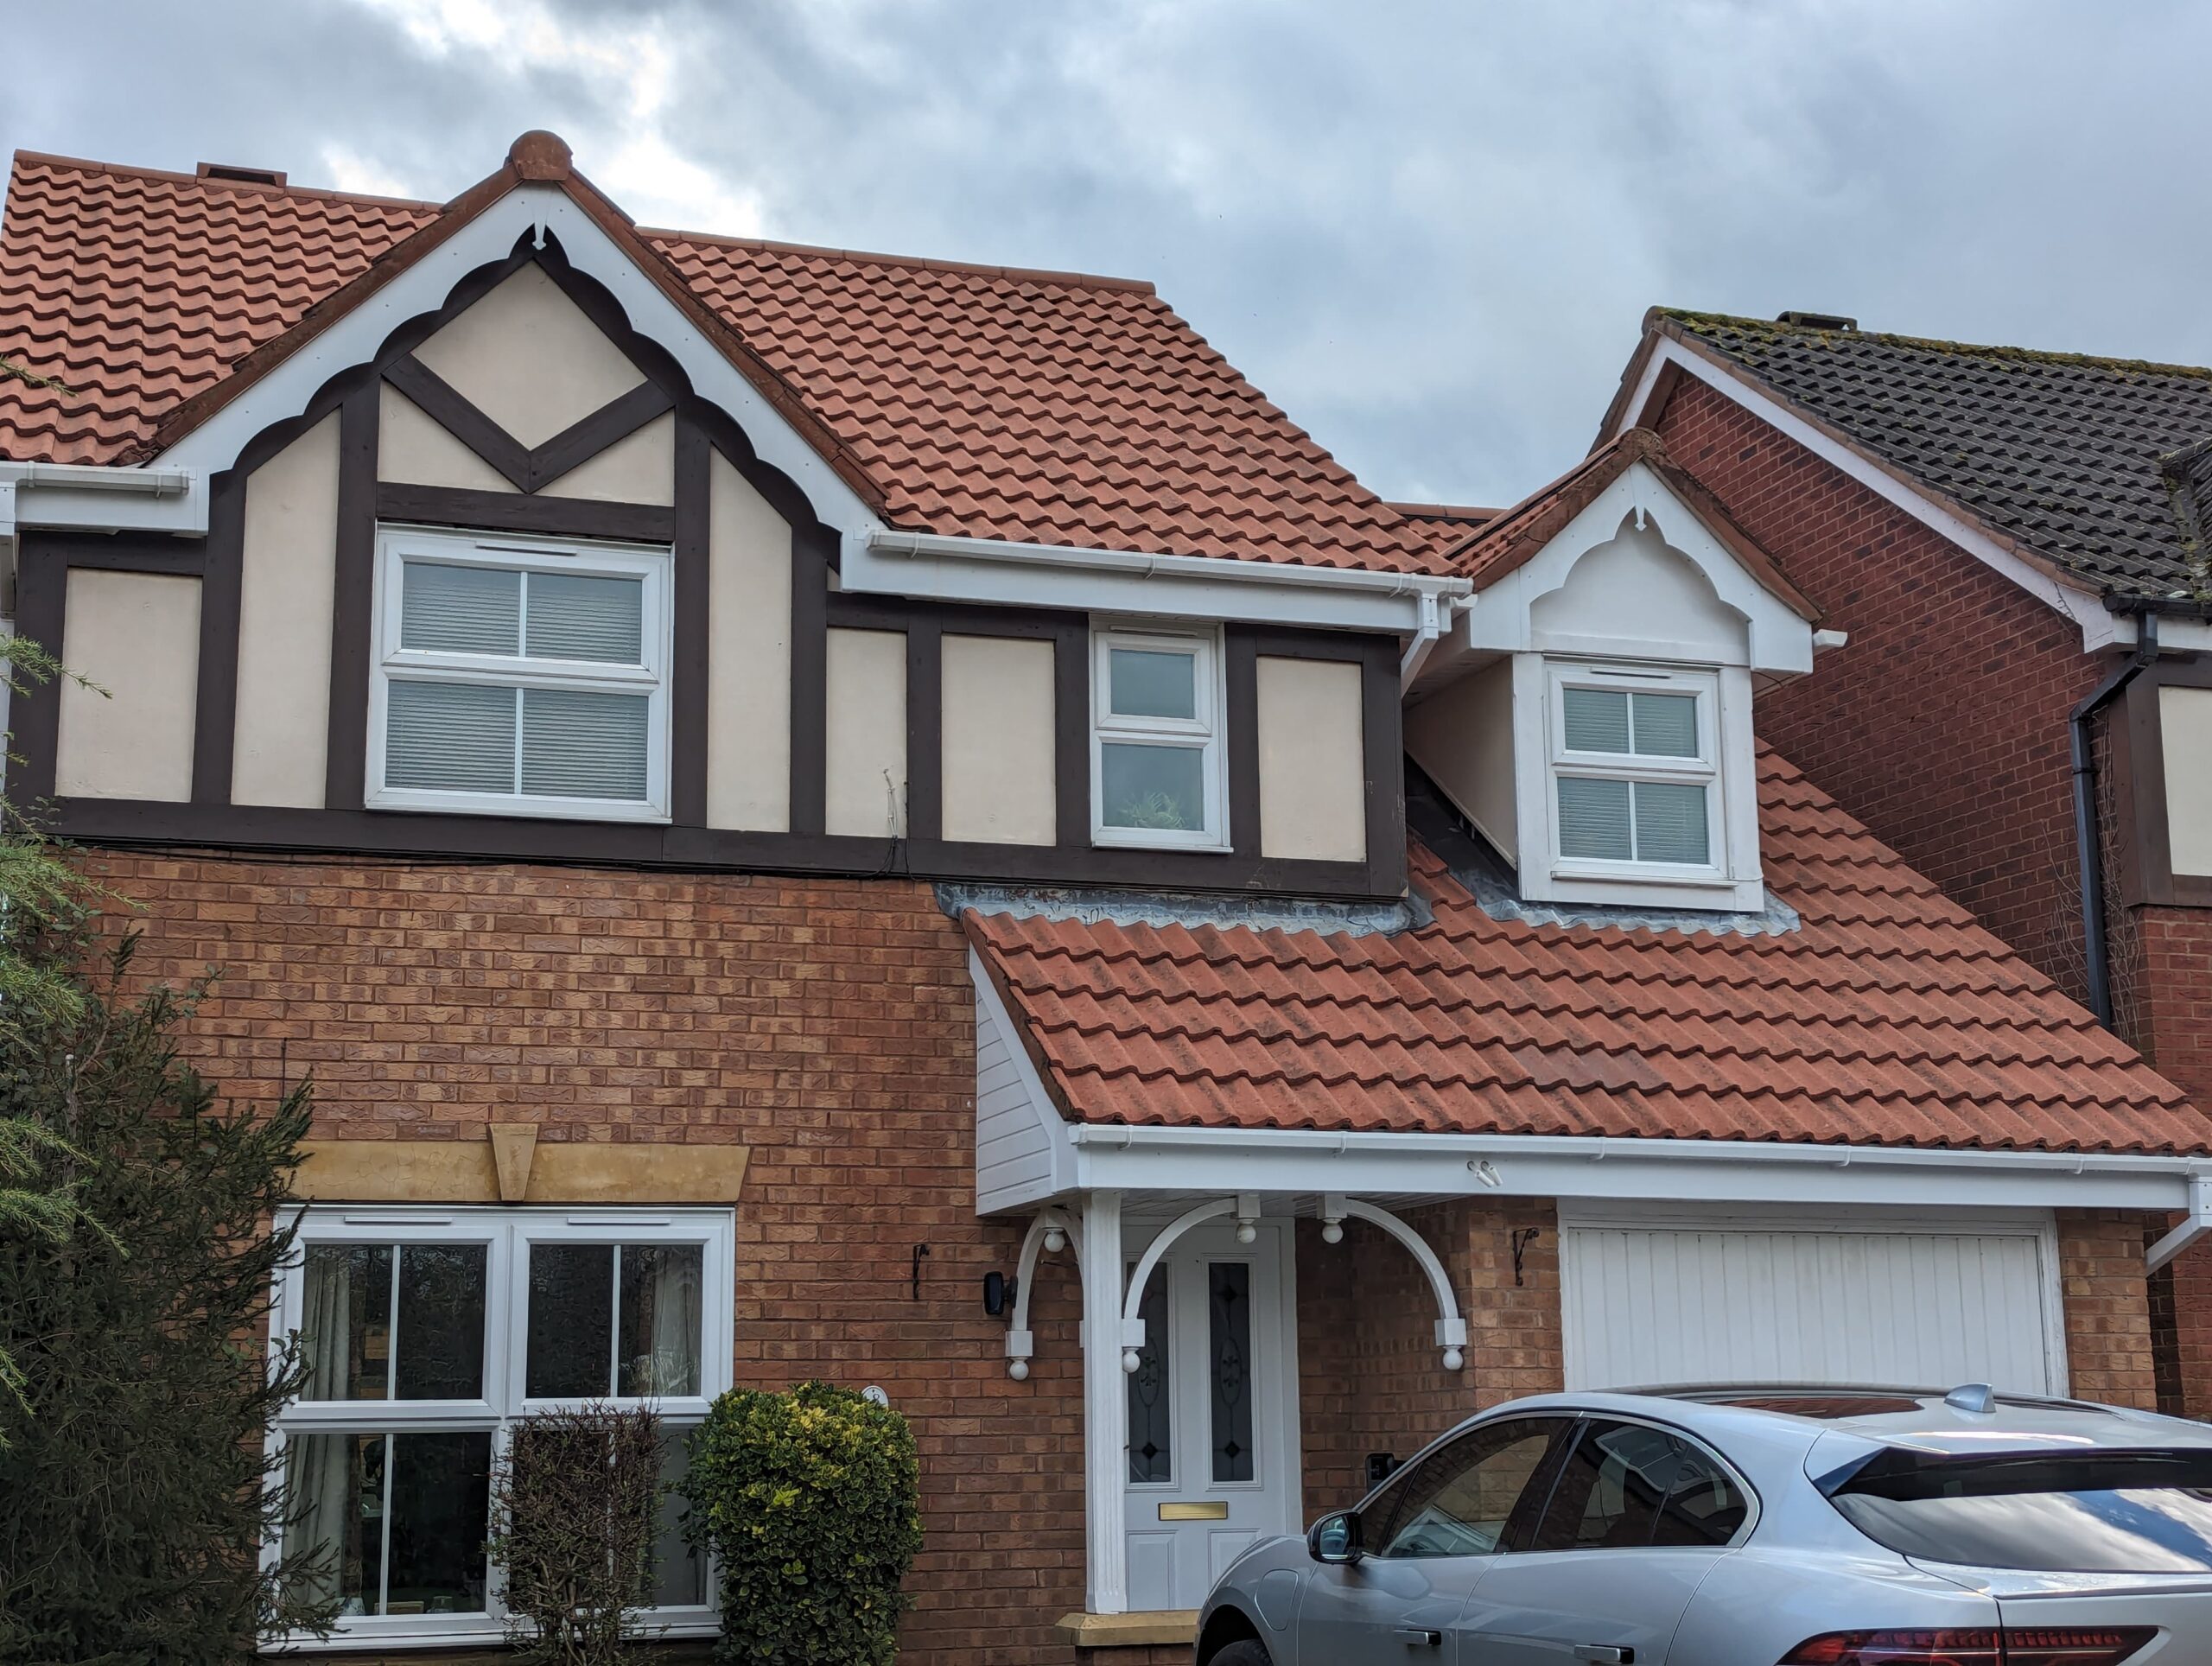 Professional Roof Cleaning in Malvern After